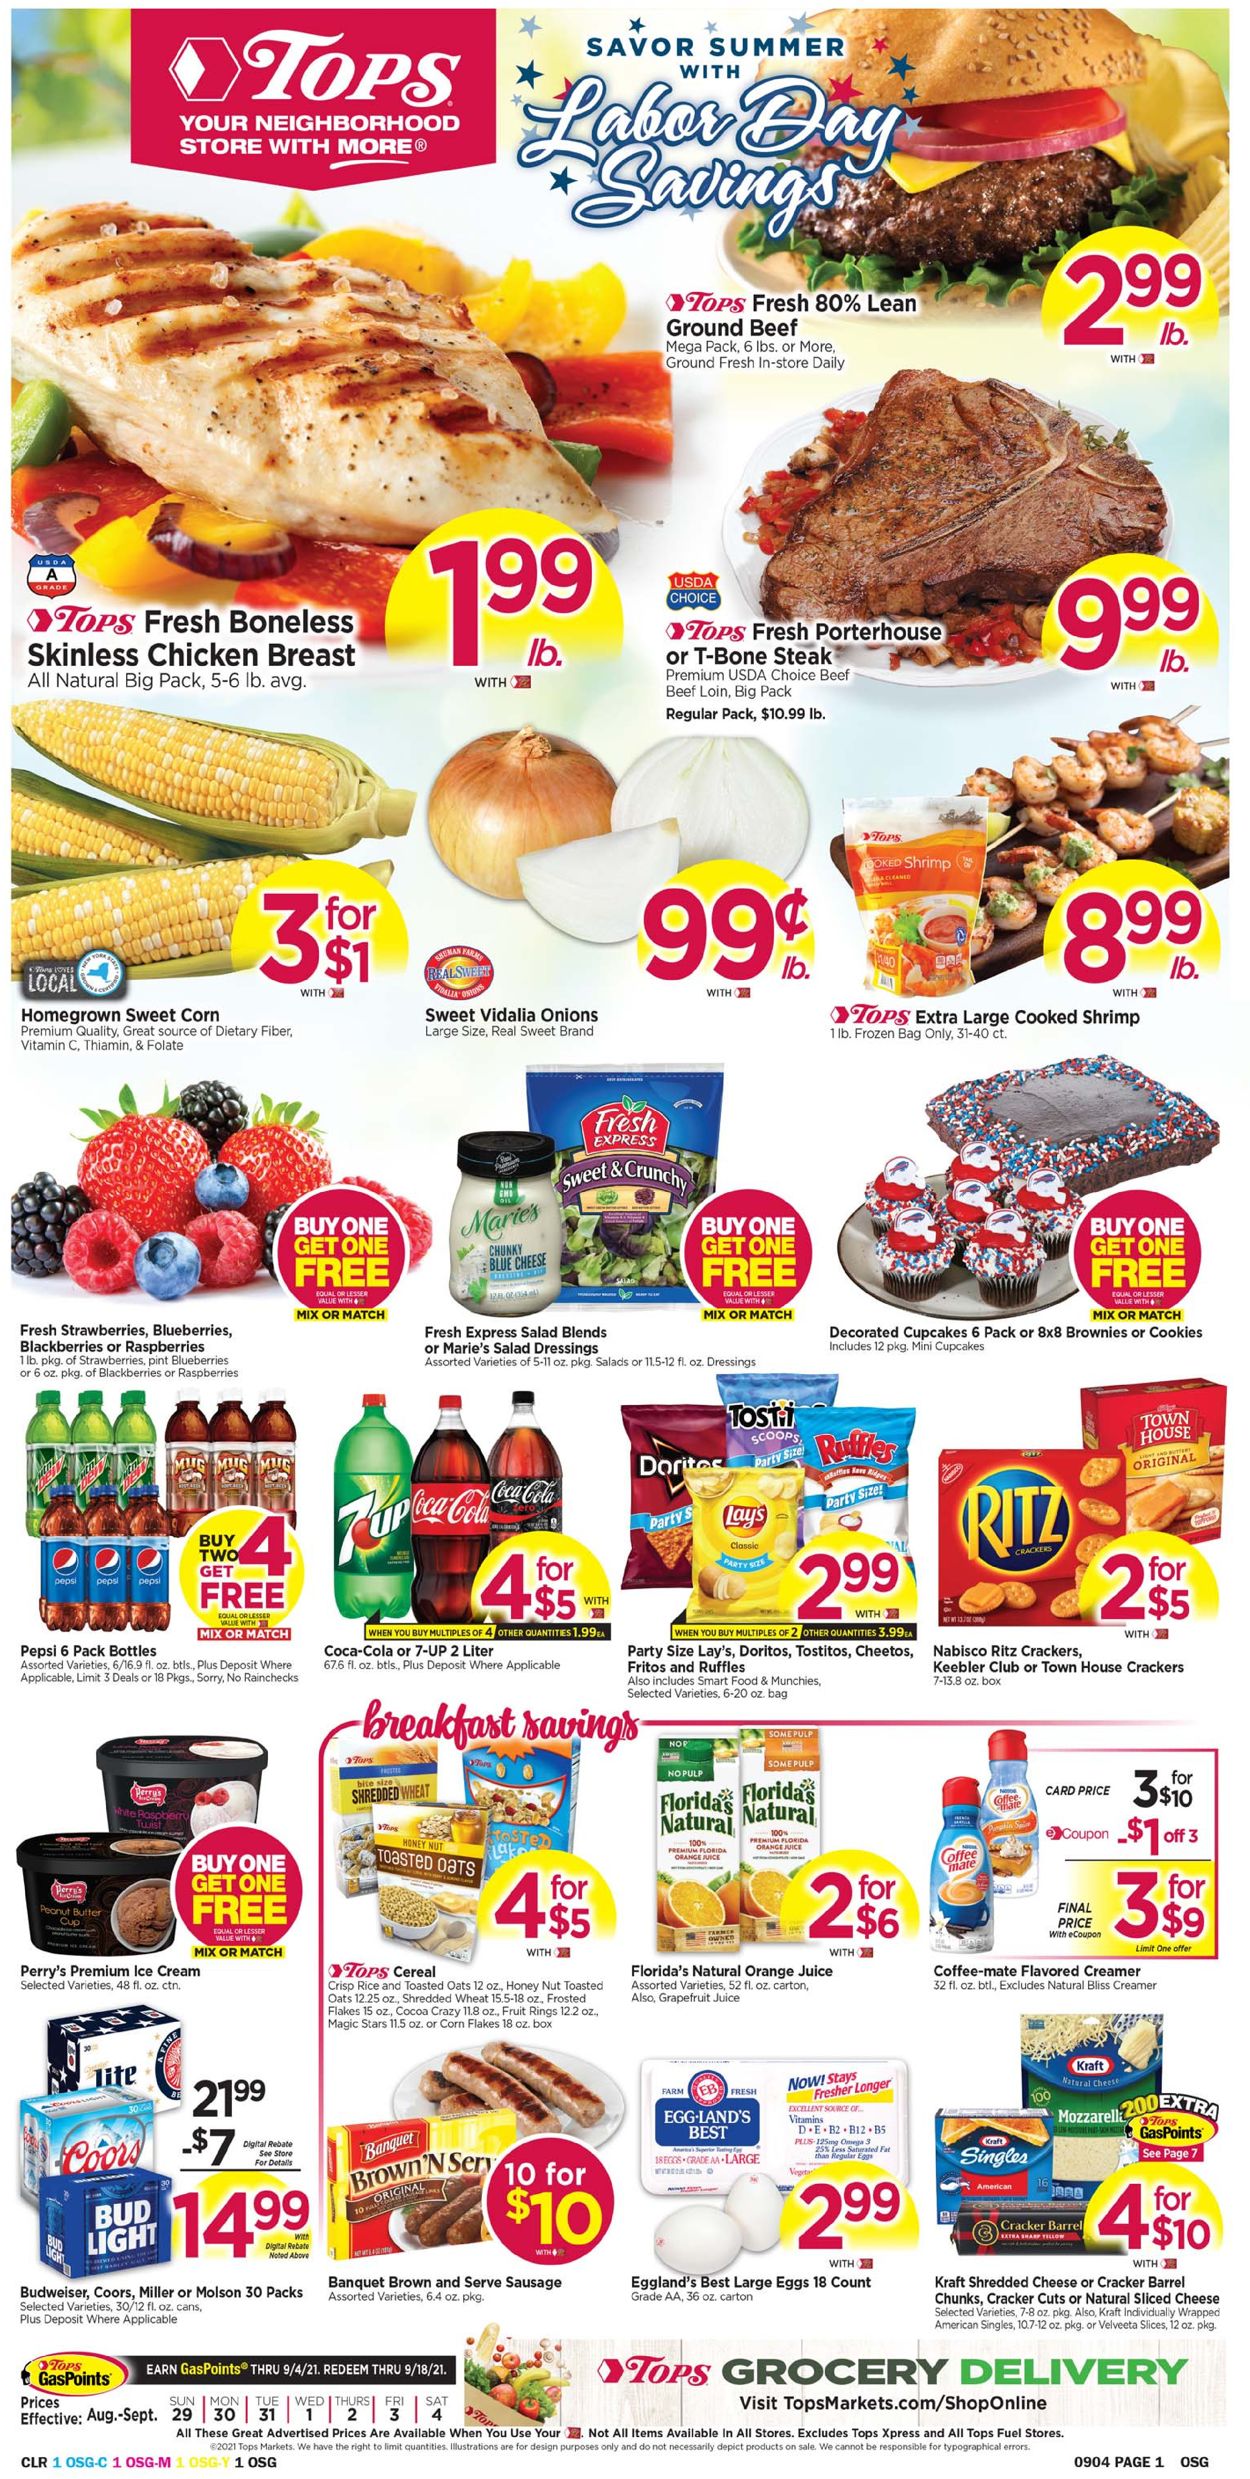 Tops Friendly Markets Current weekly ad 08/29 - 09/04/2021 - frequent ...